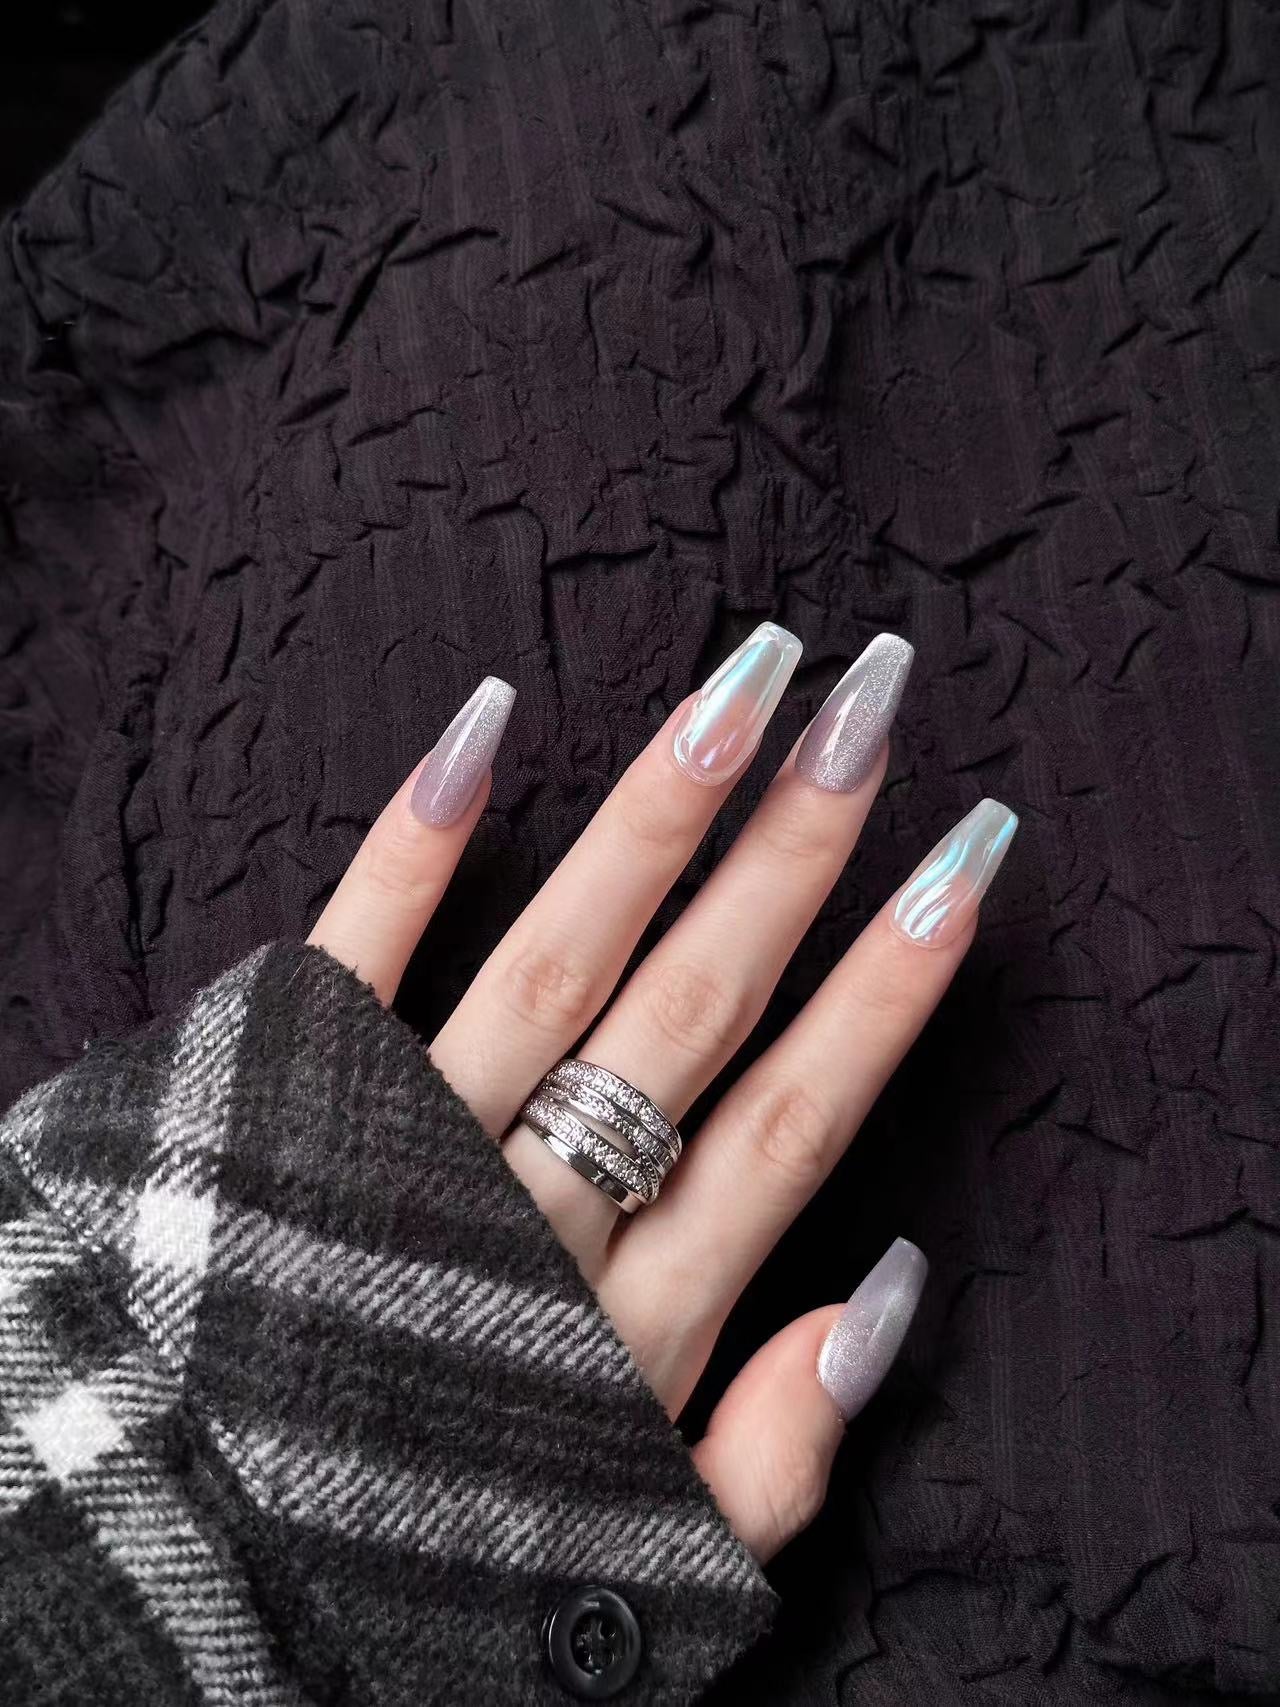 Grey Press-On Nails With Letters Design In Ombre Effect - RAINBOO BEAUTY